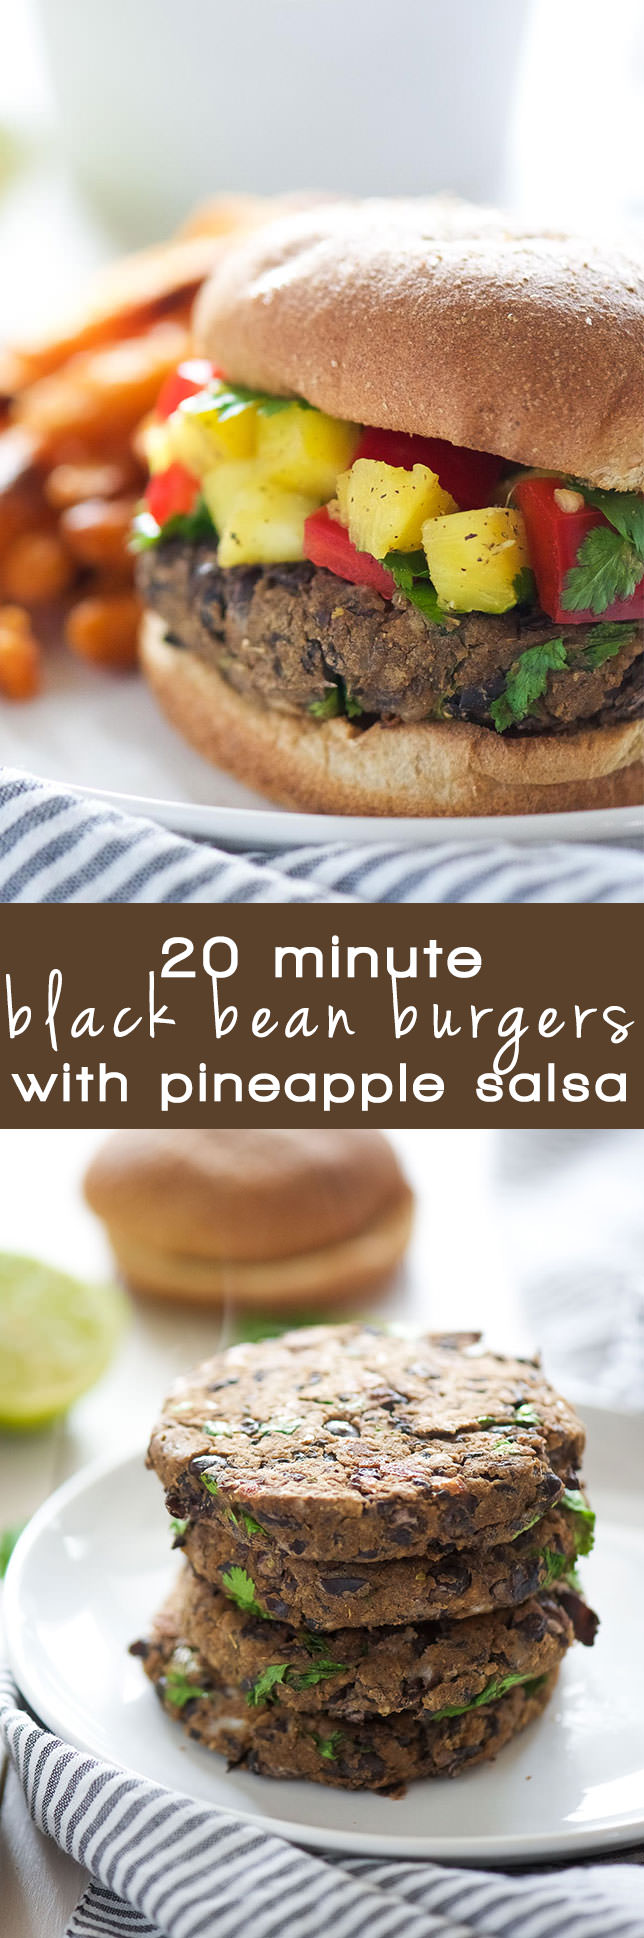 Take a bite out of these 20 Minute, homemade black bean burgers that come together with pantry items and topped with a sweet, pineapple salsa! 